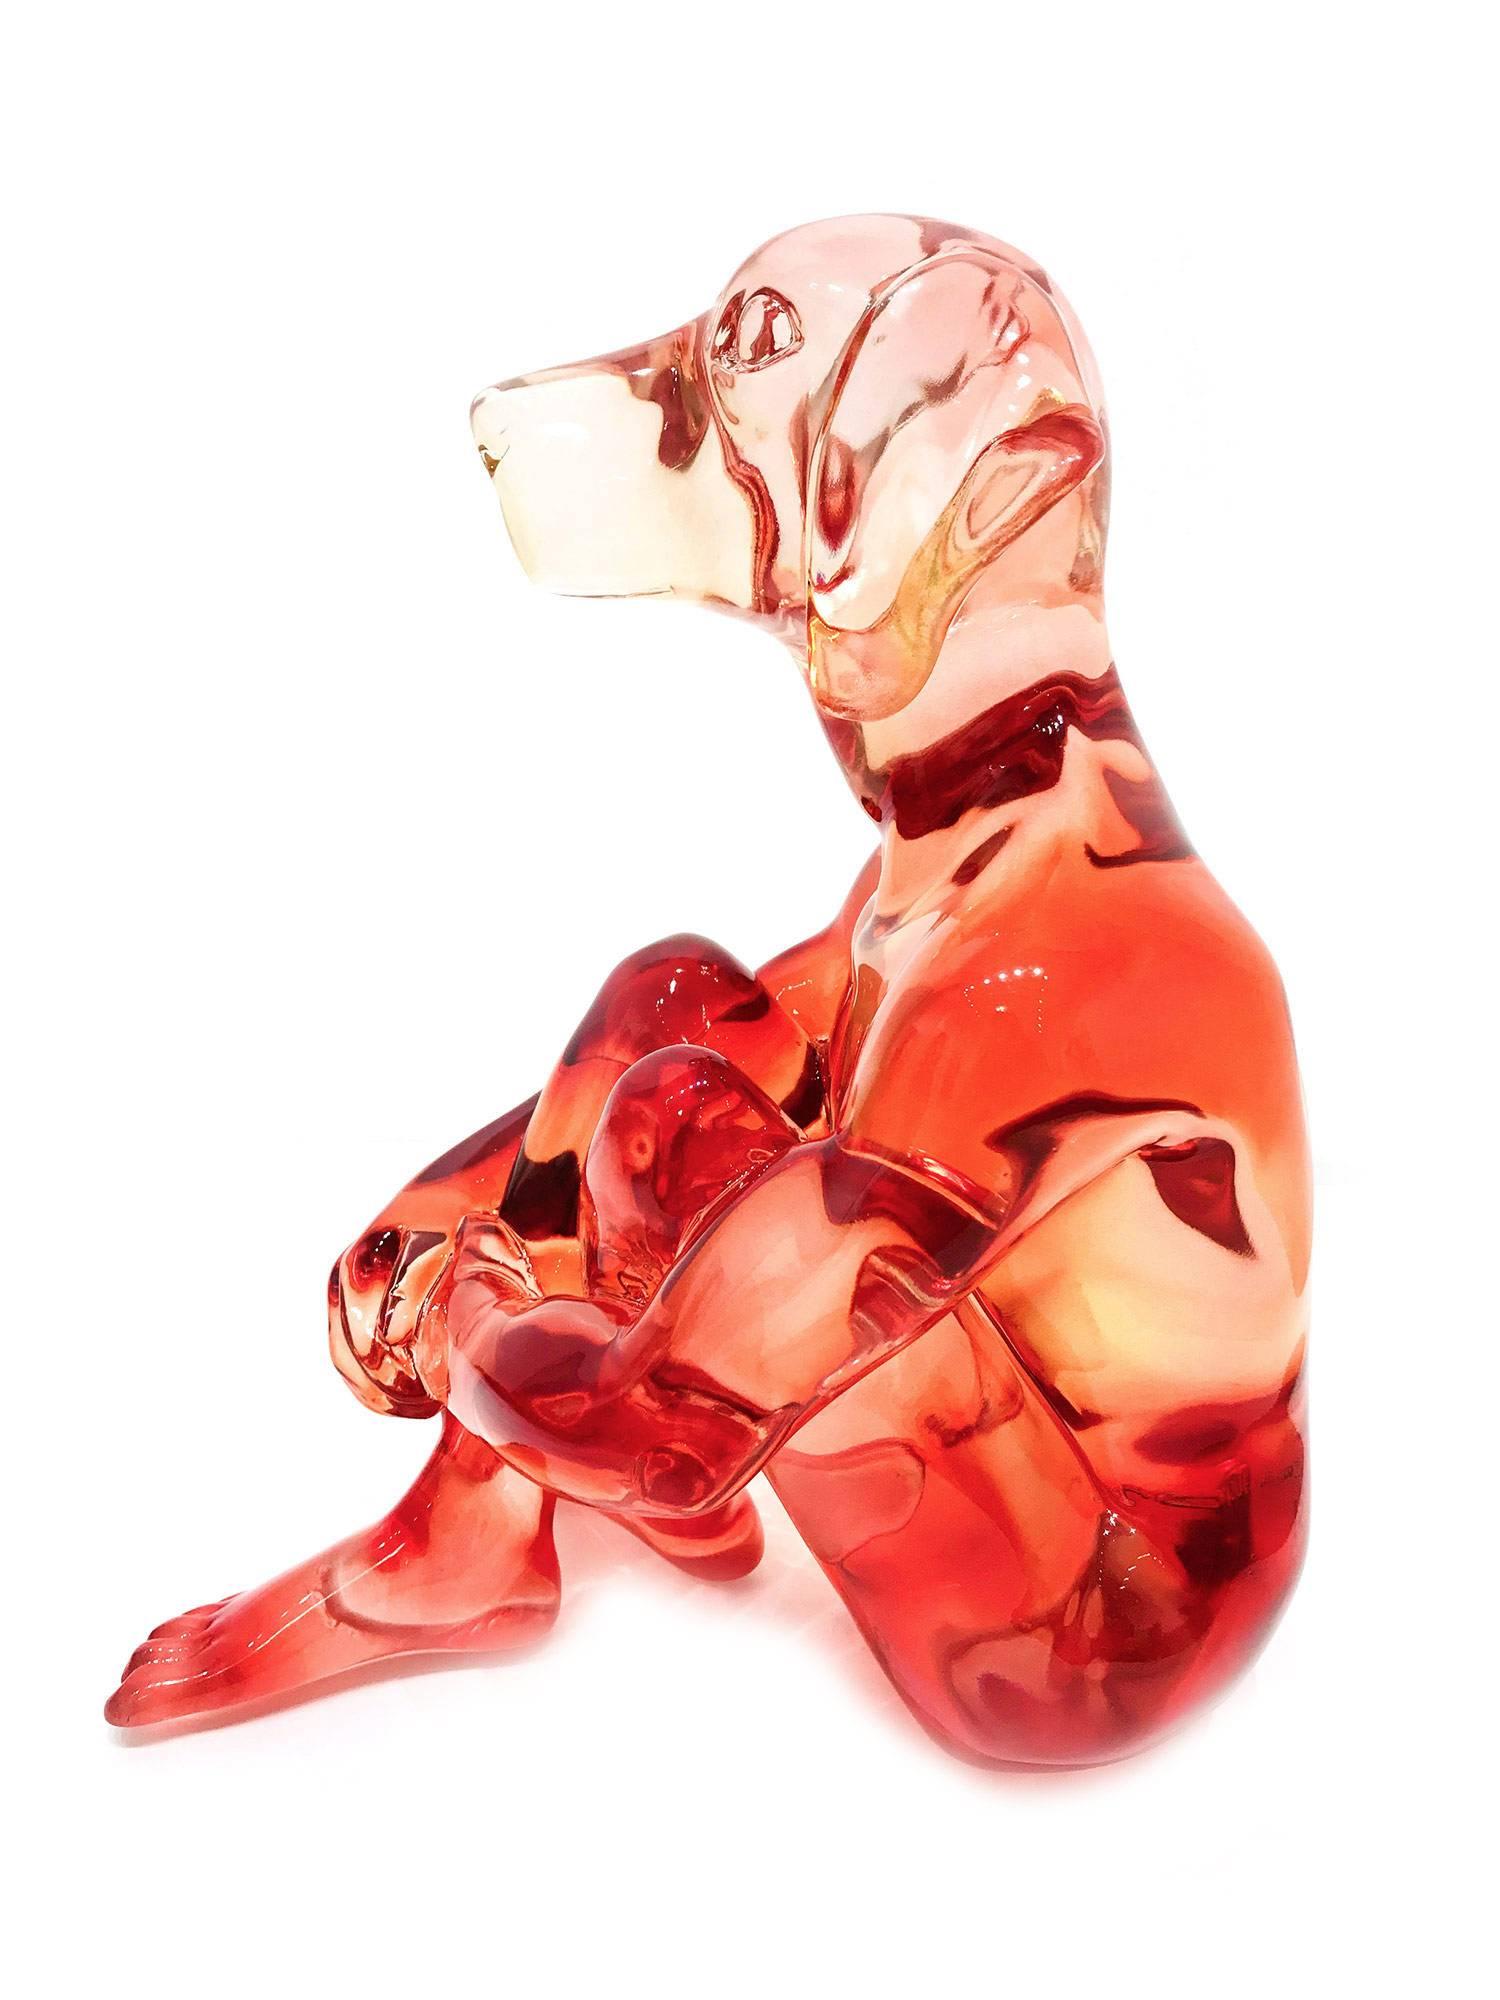 Raspberry Swirl Dogman - Red Figurative Sculpture by Gillie and Marc Schattner